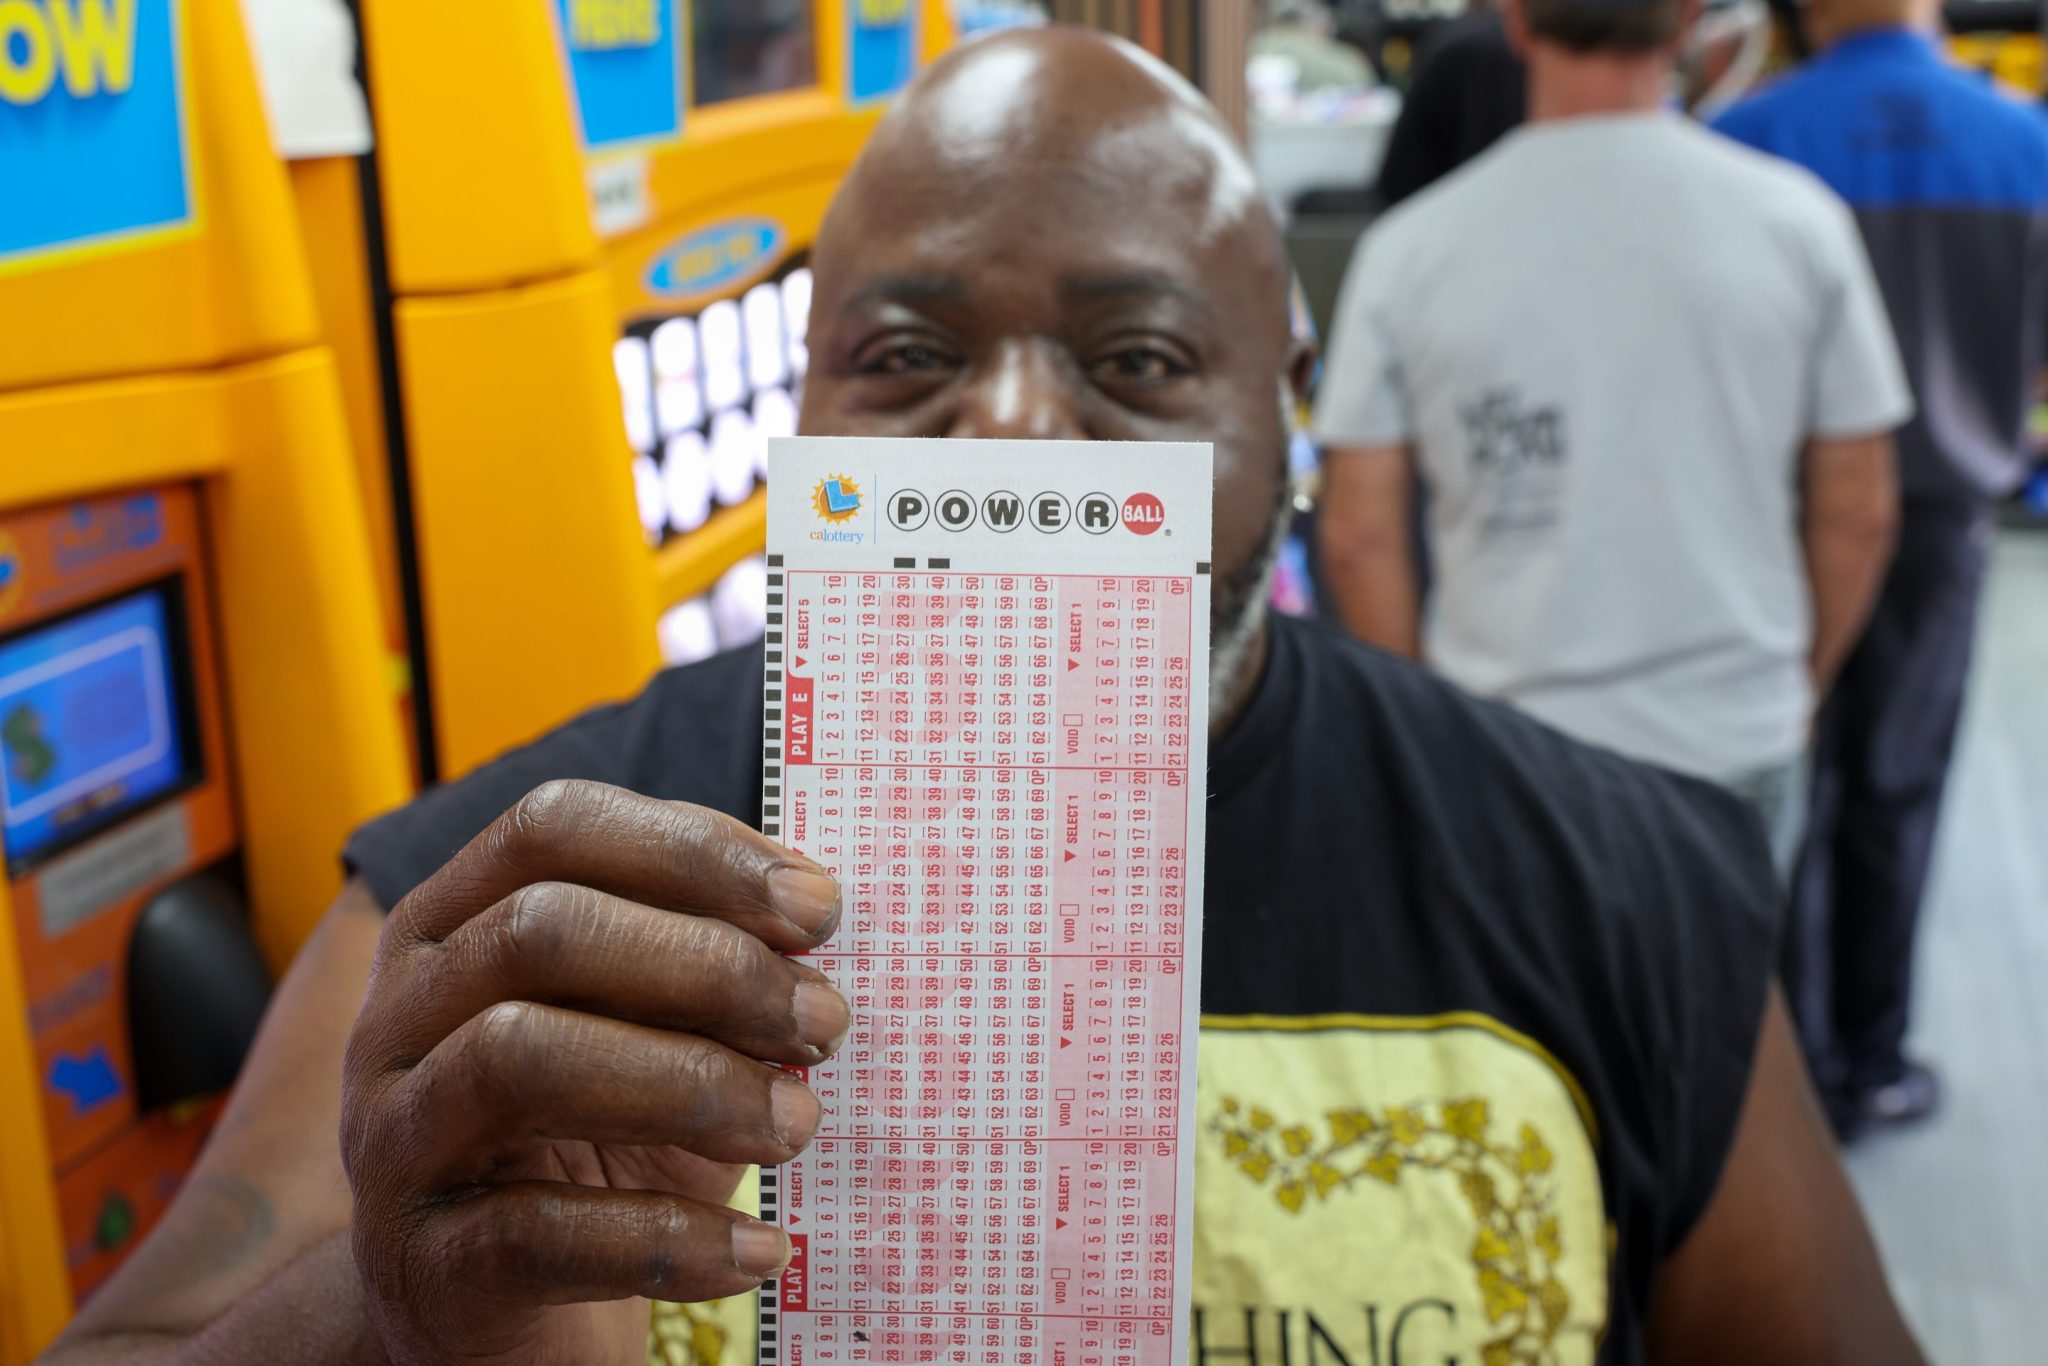 Here’s what you can buy if you win the Powerball drawing